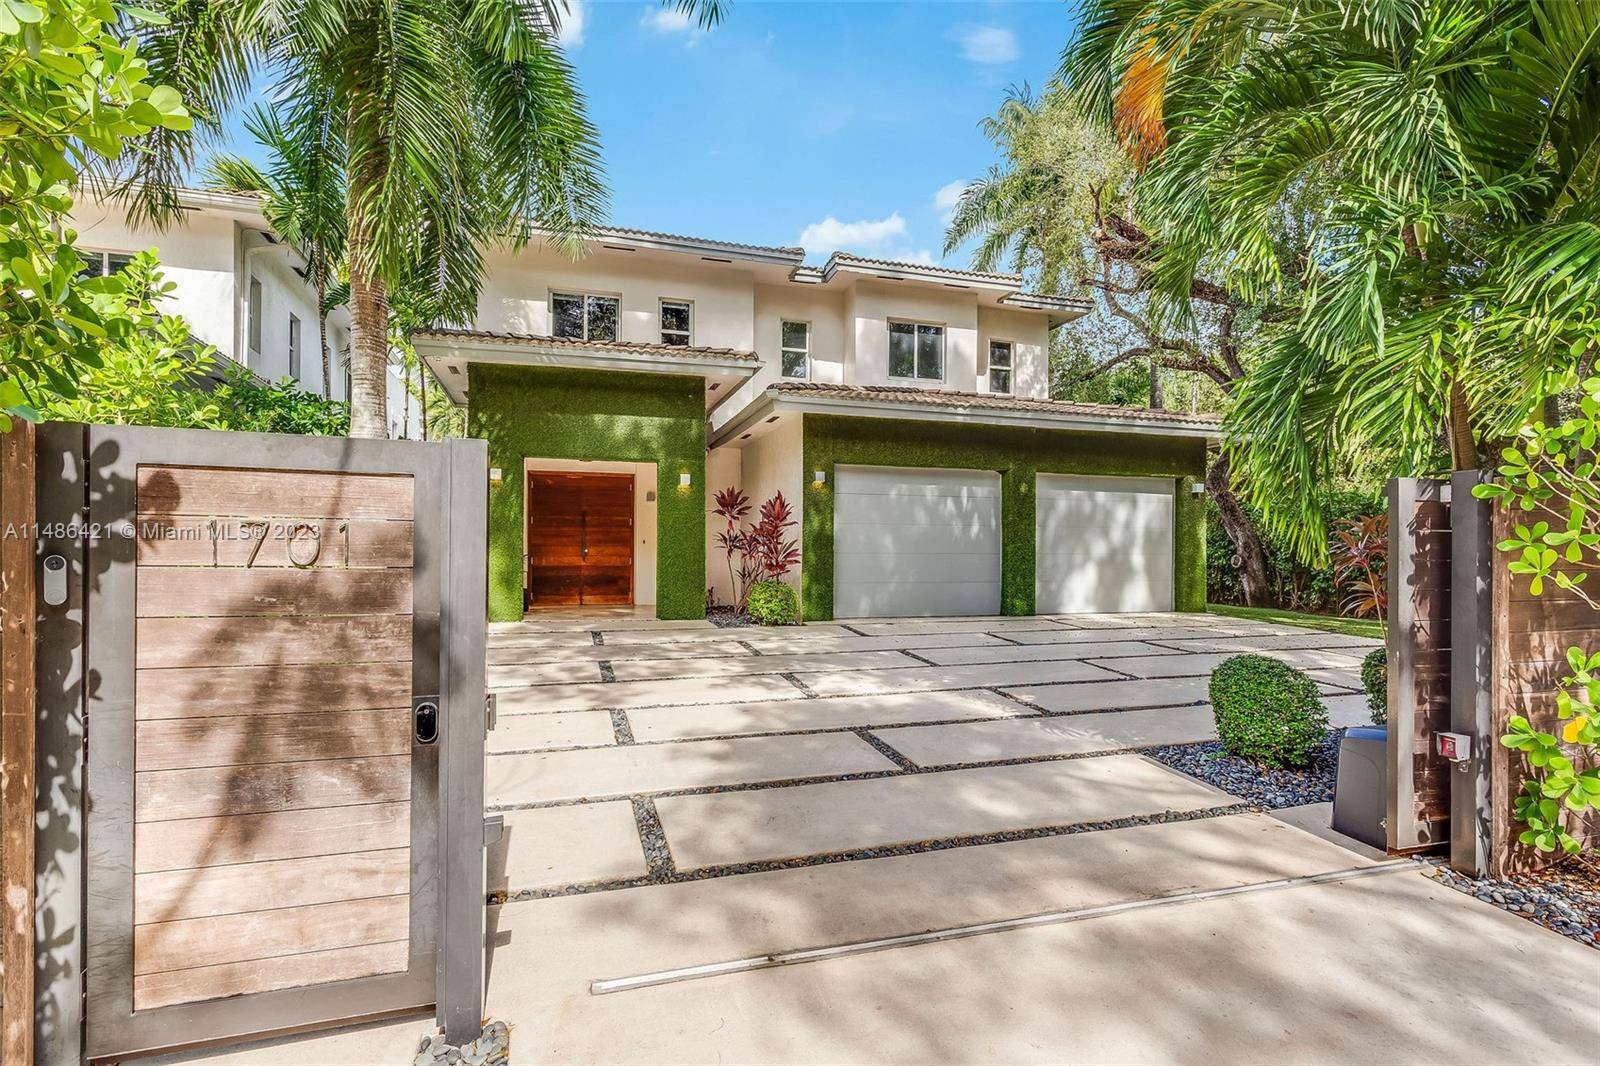 Modern luxurious 5BR 6BA contemporary design gated home in one of the best chic and stylish neighborhoods.